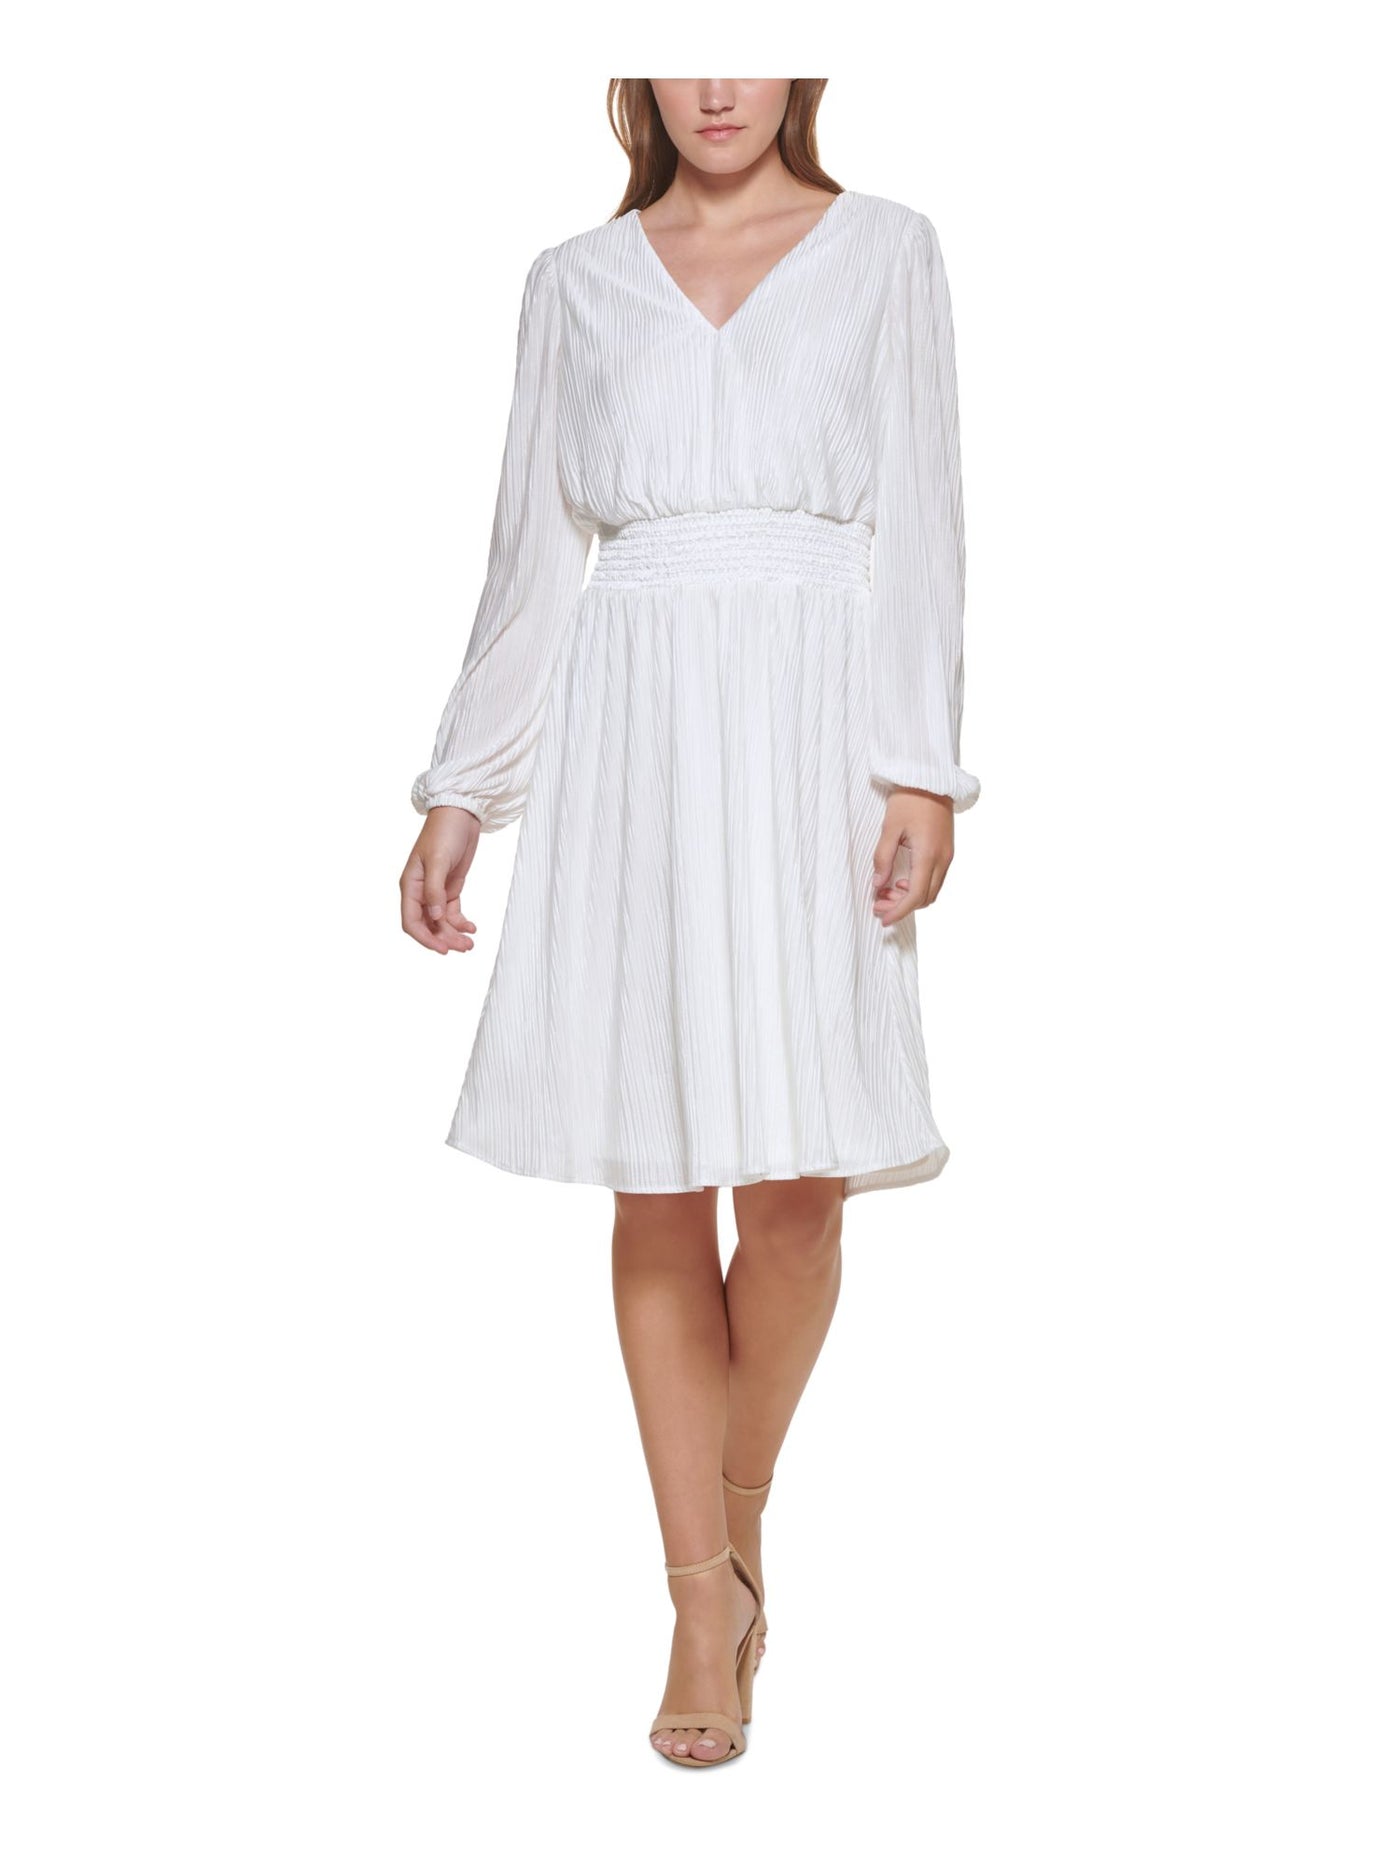 KENSIE DRESSES Womens White Pleated Lined Smocked Waist Long Sleeve V Neck Above The Knee Cocktail Fit + Flare Dress 12